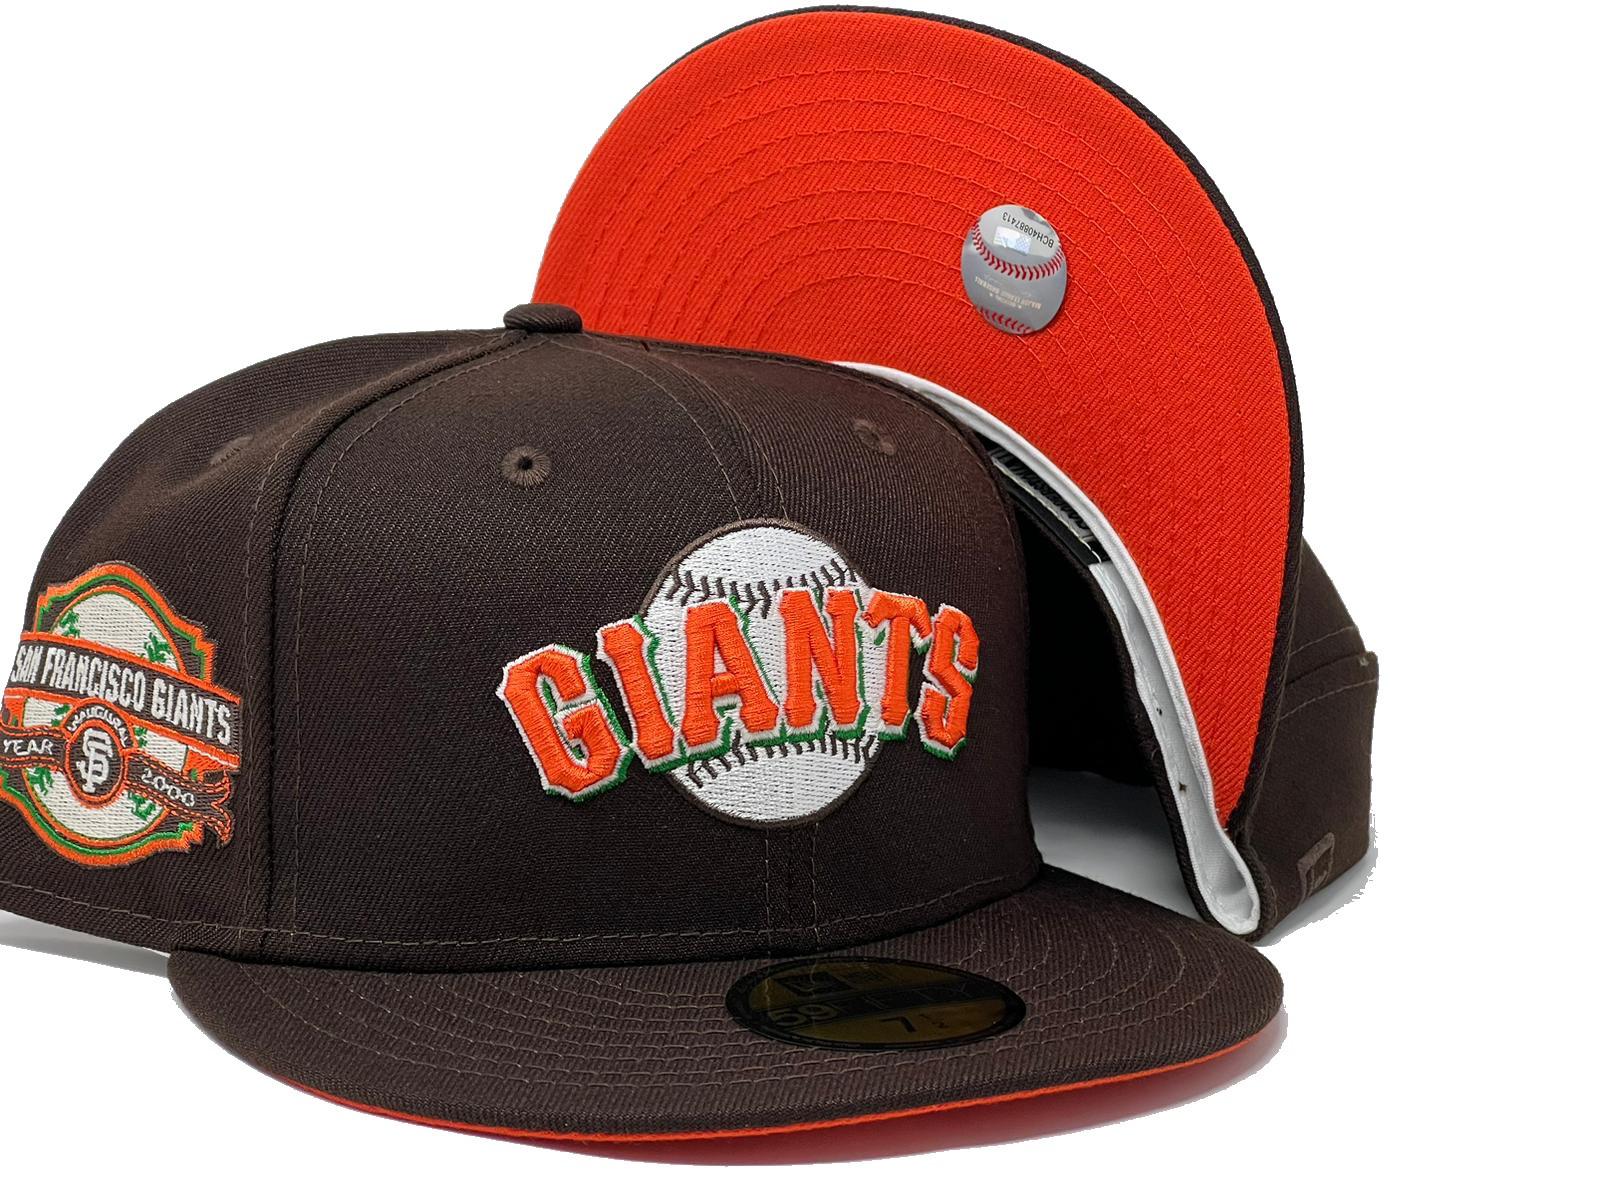 NEW ERA THE ORIGINAL SAN FRANCISCO GIANTS FITTED HAT (BROWN